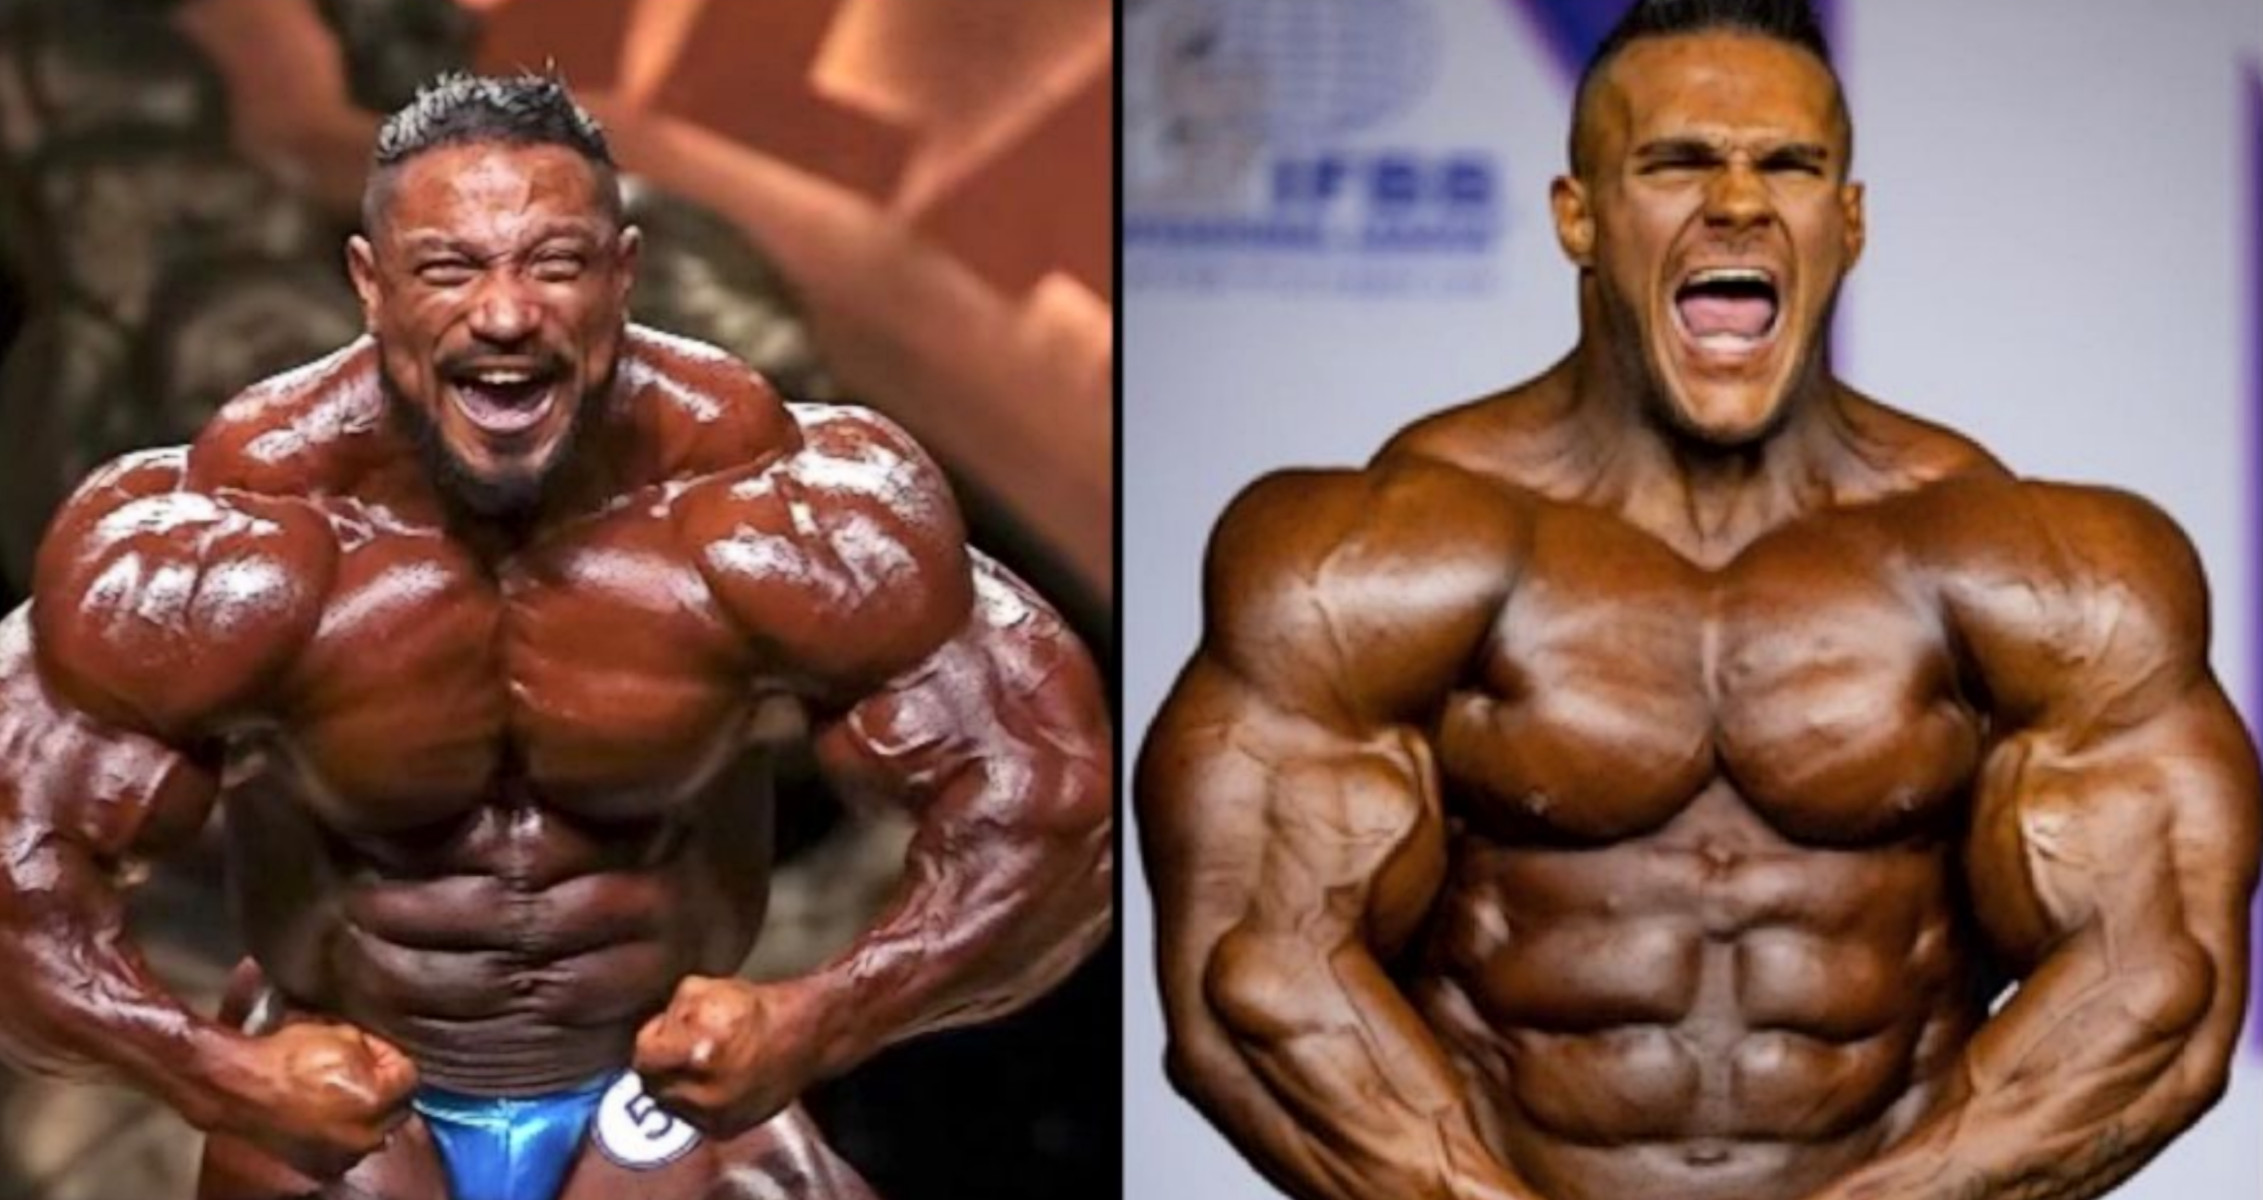 Get-Ready-For-Roelly-Winklaar-vs-Nick-Walker-at-The-2021-Arnold-Classic.jpg